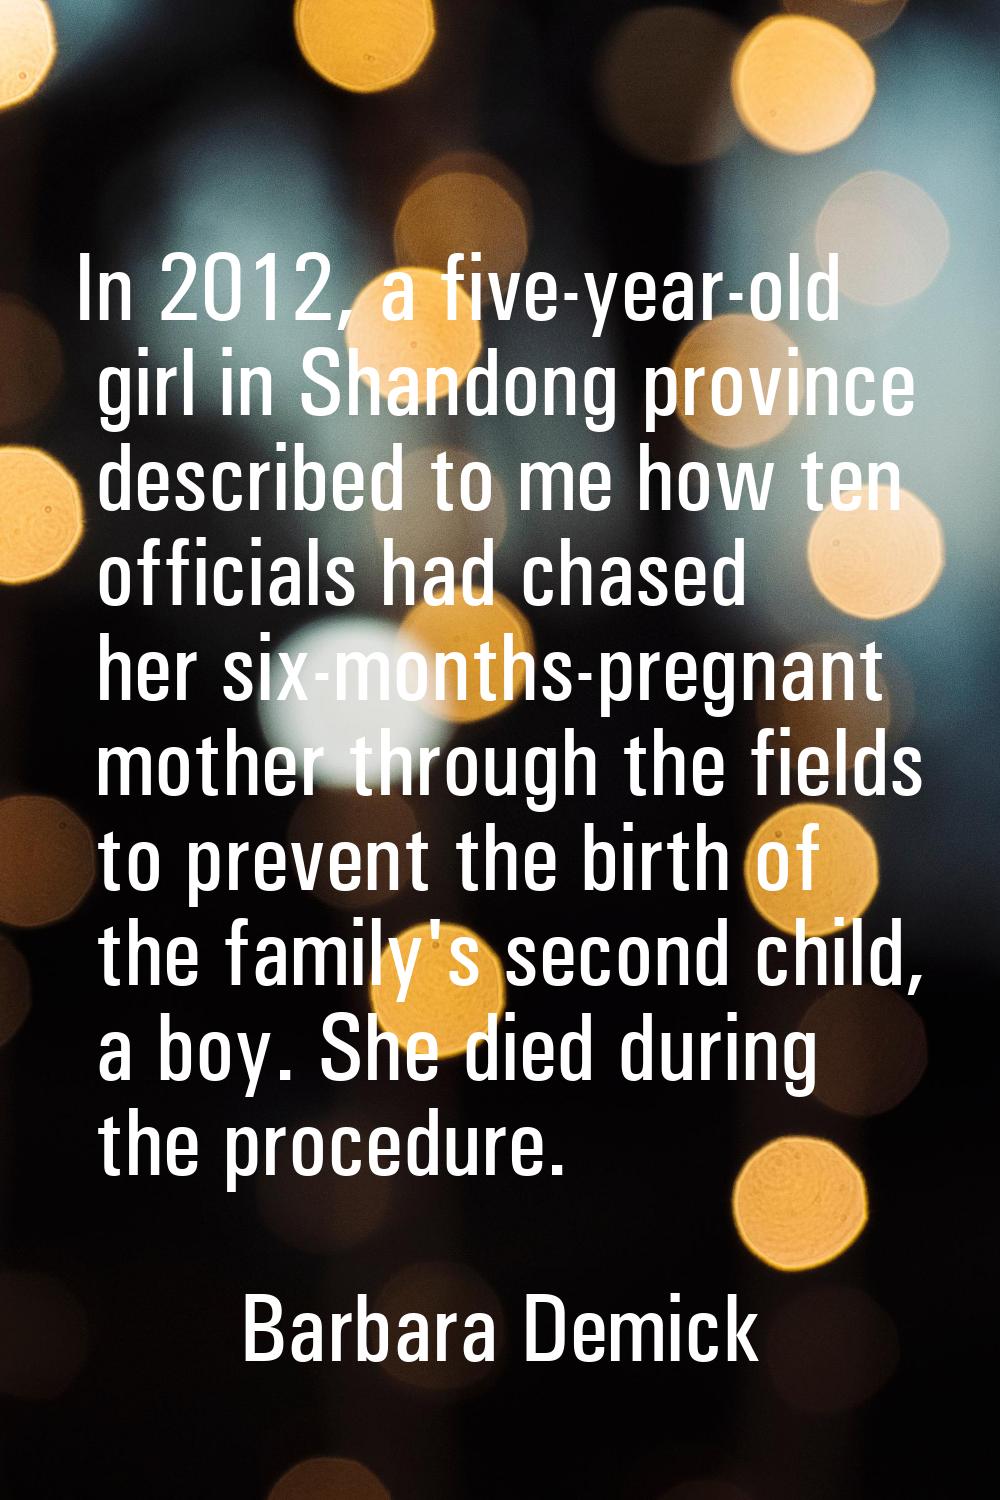 In 2012, a five-year-old girl in Shandong province described to me how ten officials had chased her